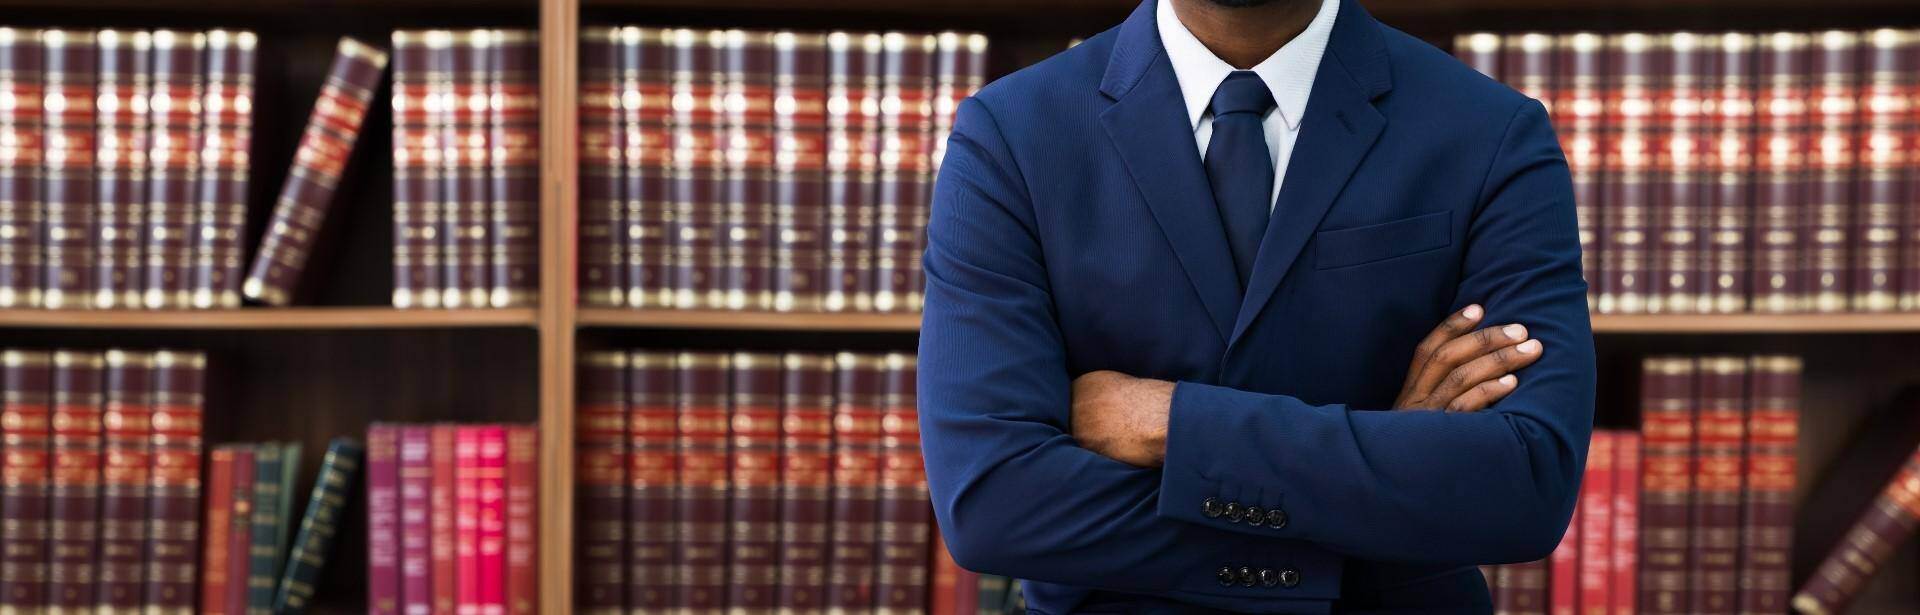 A black lawyer standing in front of a bookshelf of law book in Duluth, Georgia